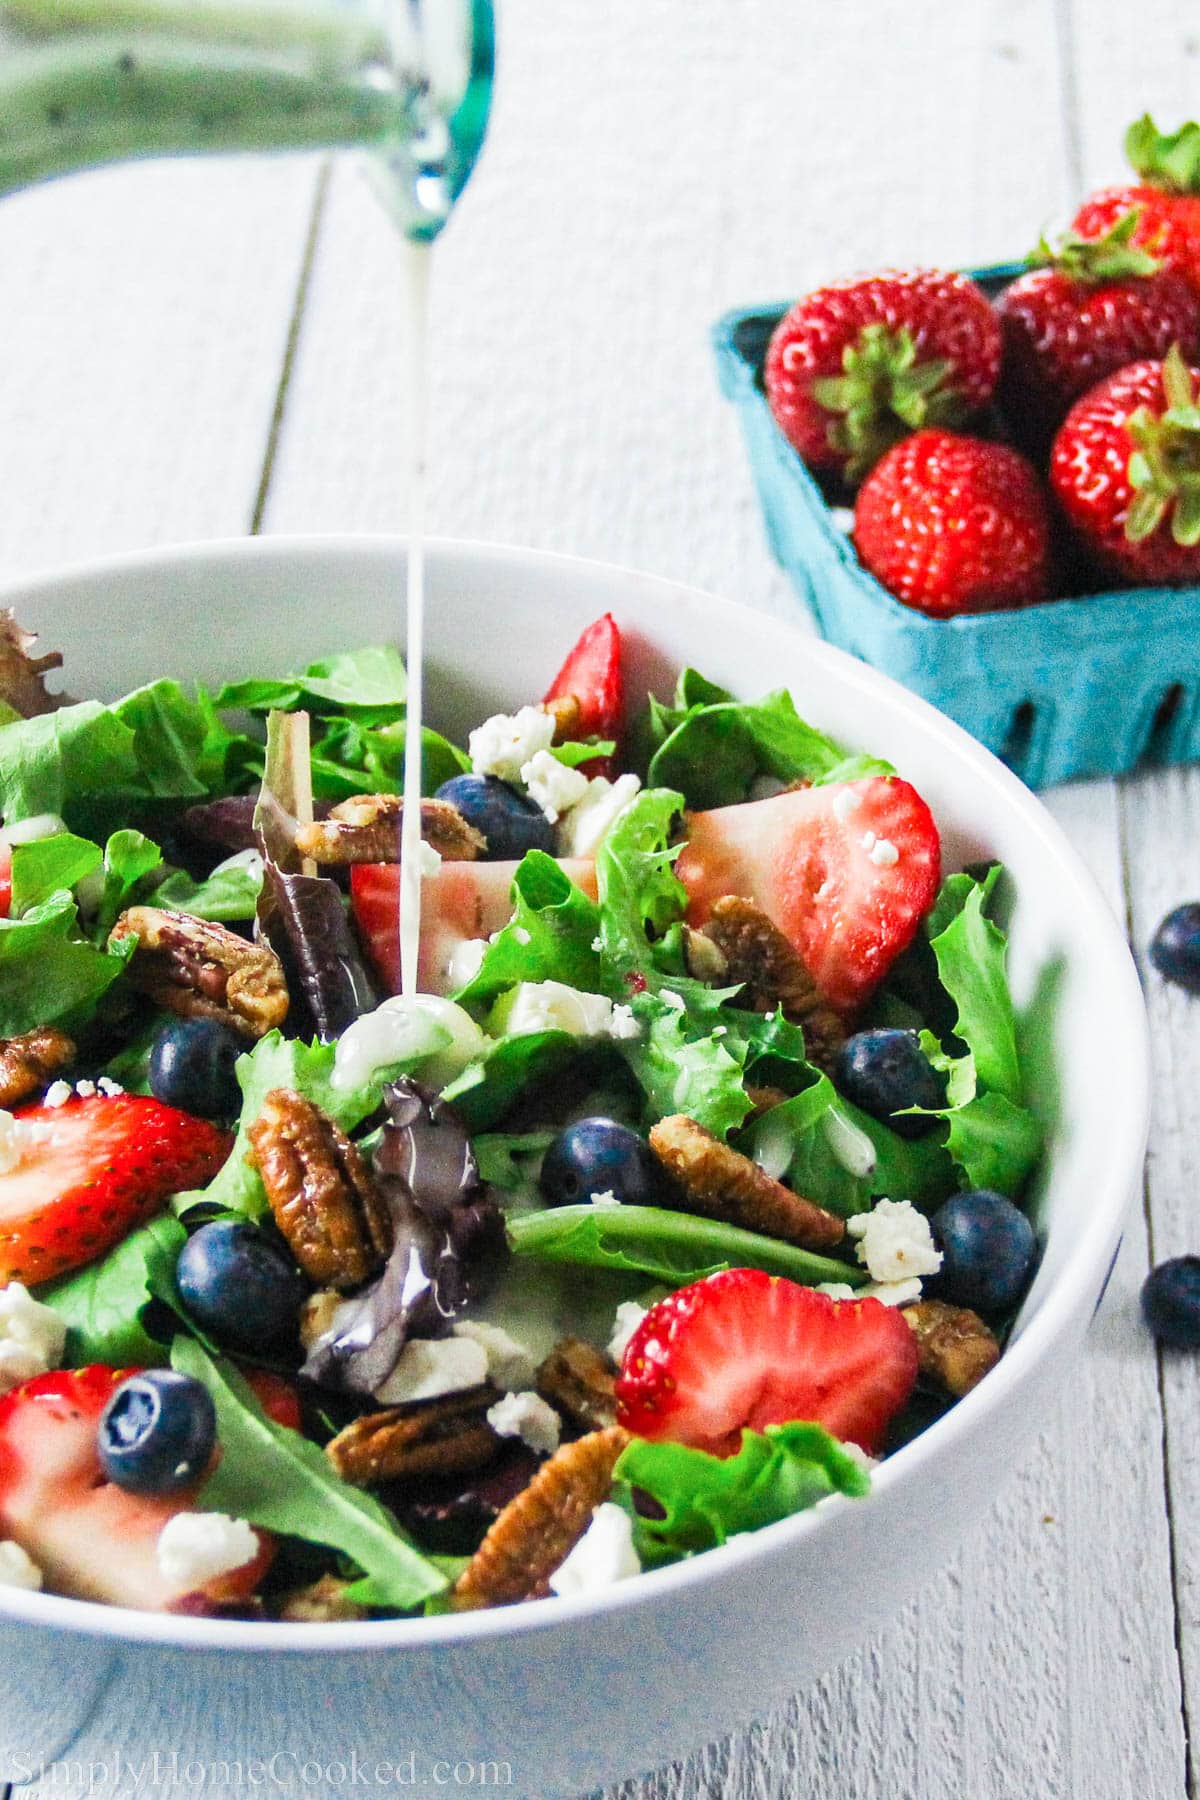 Drizzle the dressing over the strawberry feta spinach salad with berries as a side.